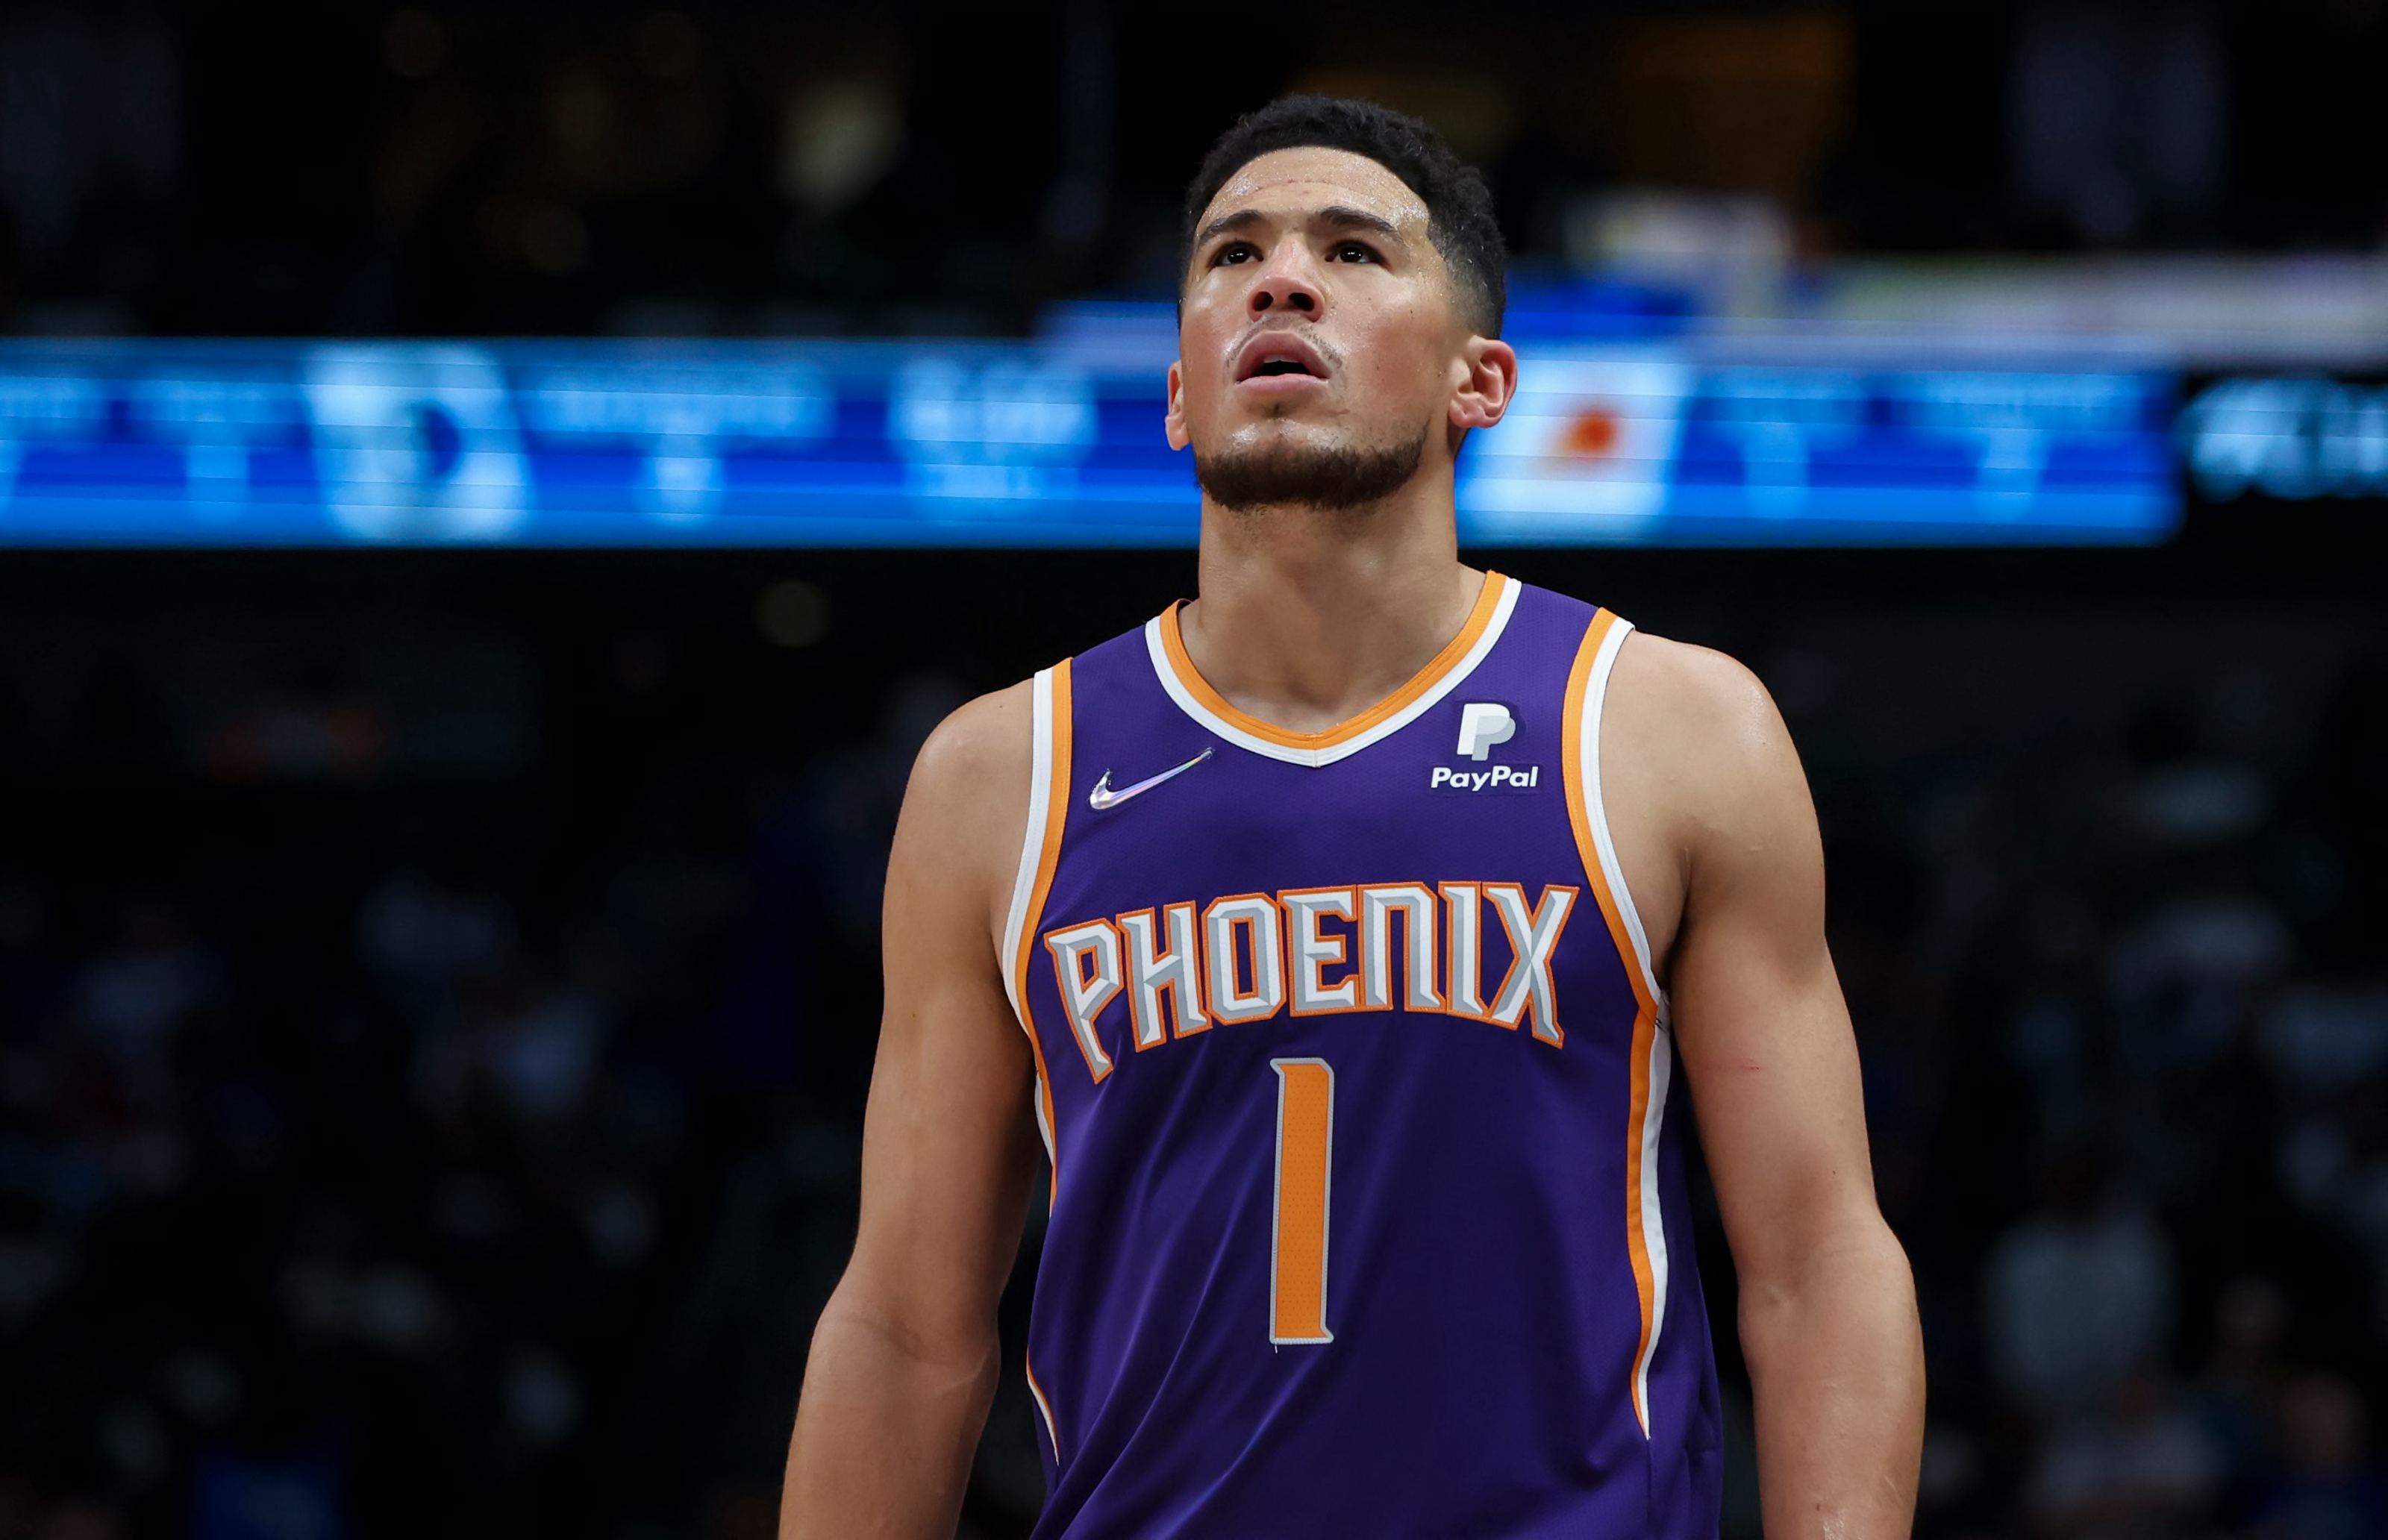 Ranking the Top 25 Players in Phoenix Suns History